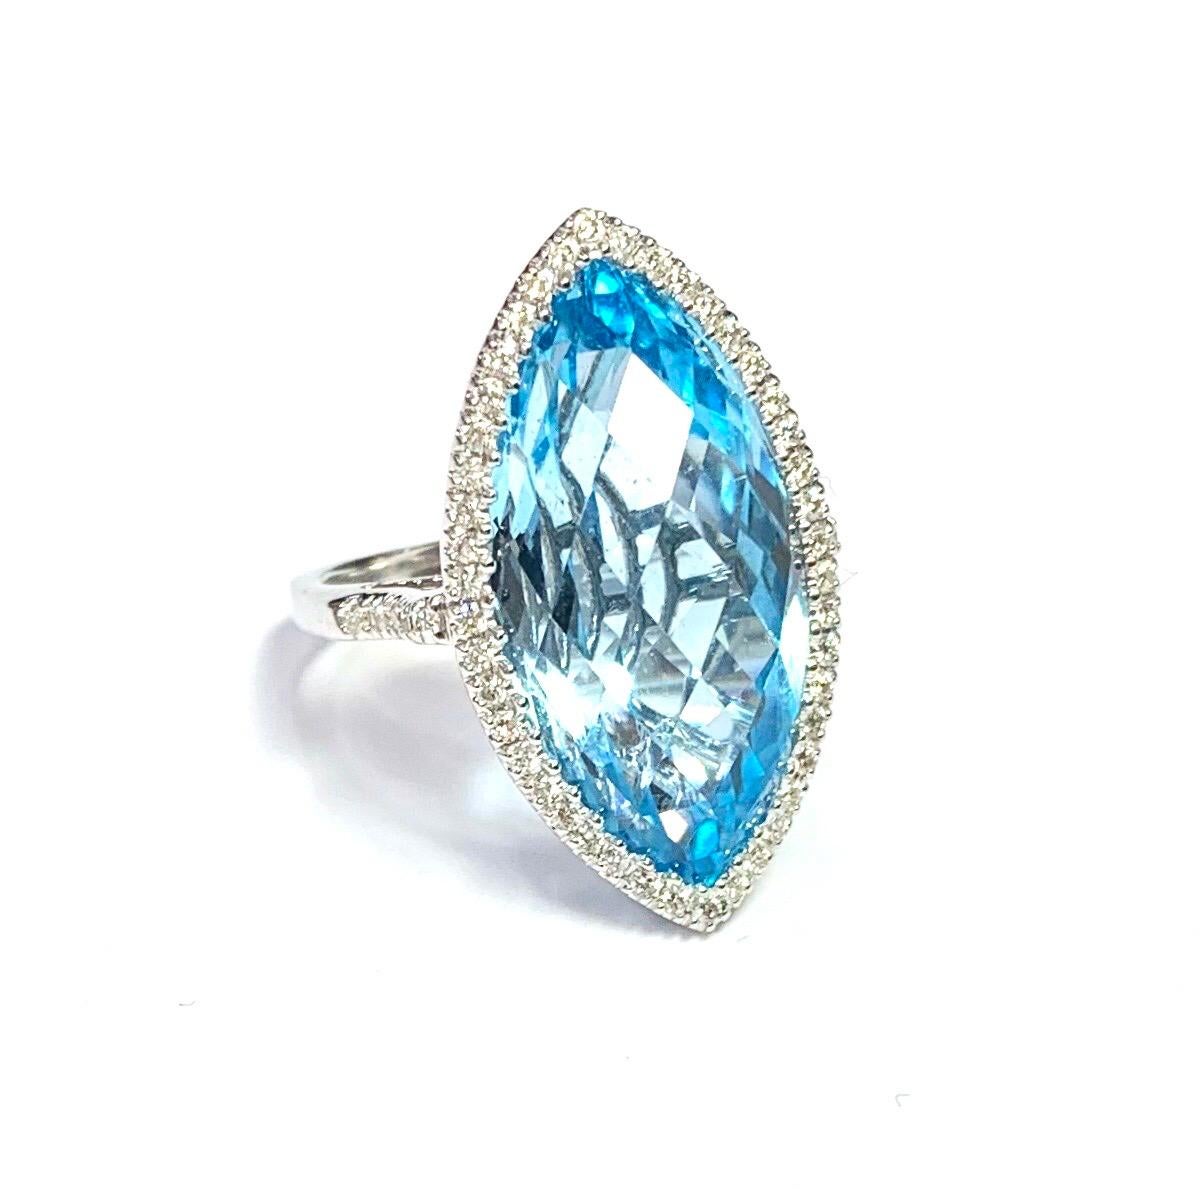 18ct White Gold Edwardian Style Marquise Shape Blue Topaz and Diamond Cluster Ring. Set with one central buff cut Blue Topaz. Surrounded by round brilliant cut diamonds and diamond shoulders.

Approximate Blue Topaz weight : 5.50ct
Approximate total